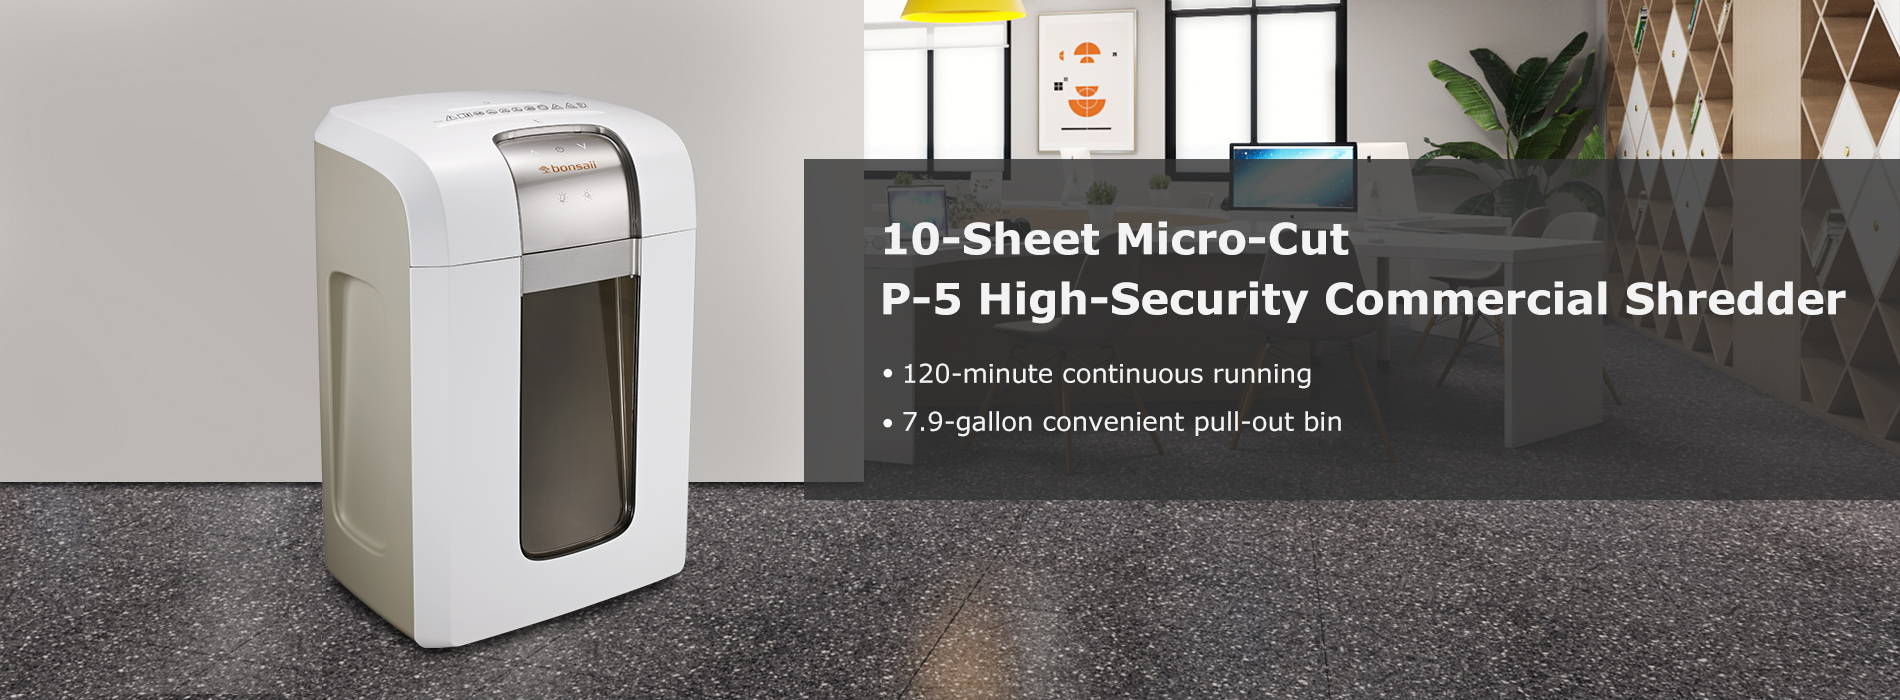 10-sheet micro-cut P-5 high security commercial shredder- 120 minutes continuous shredding 7.9-gallon convenient pull-out bin